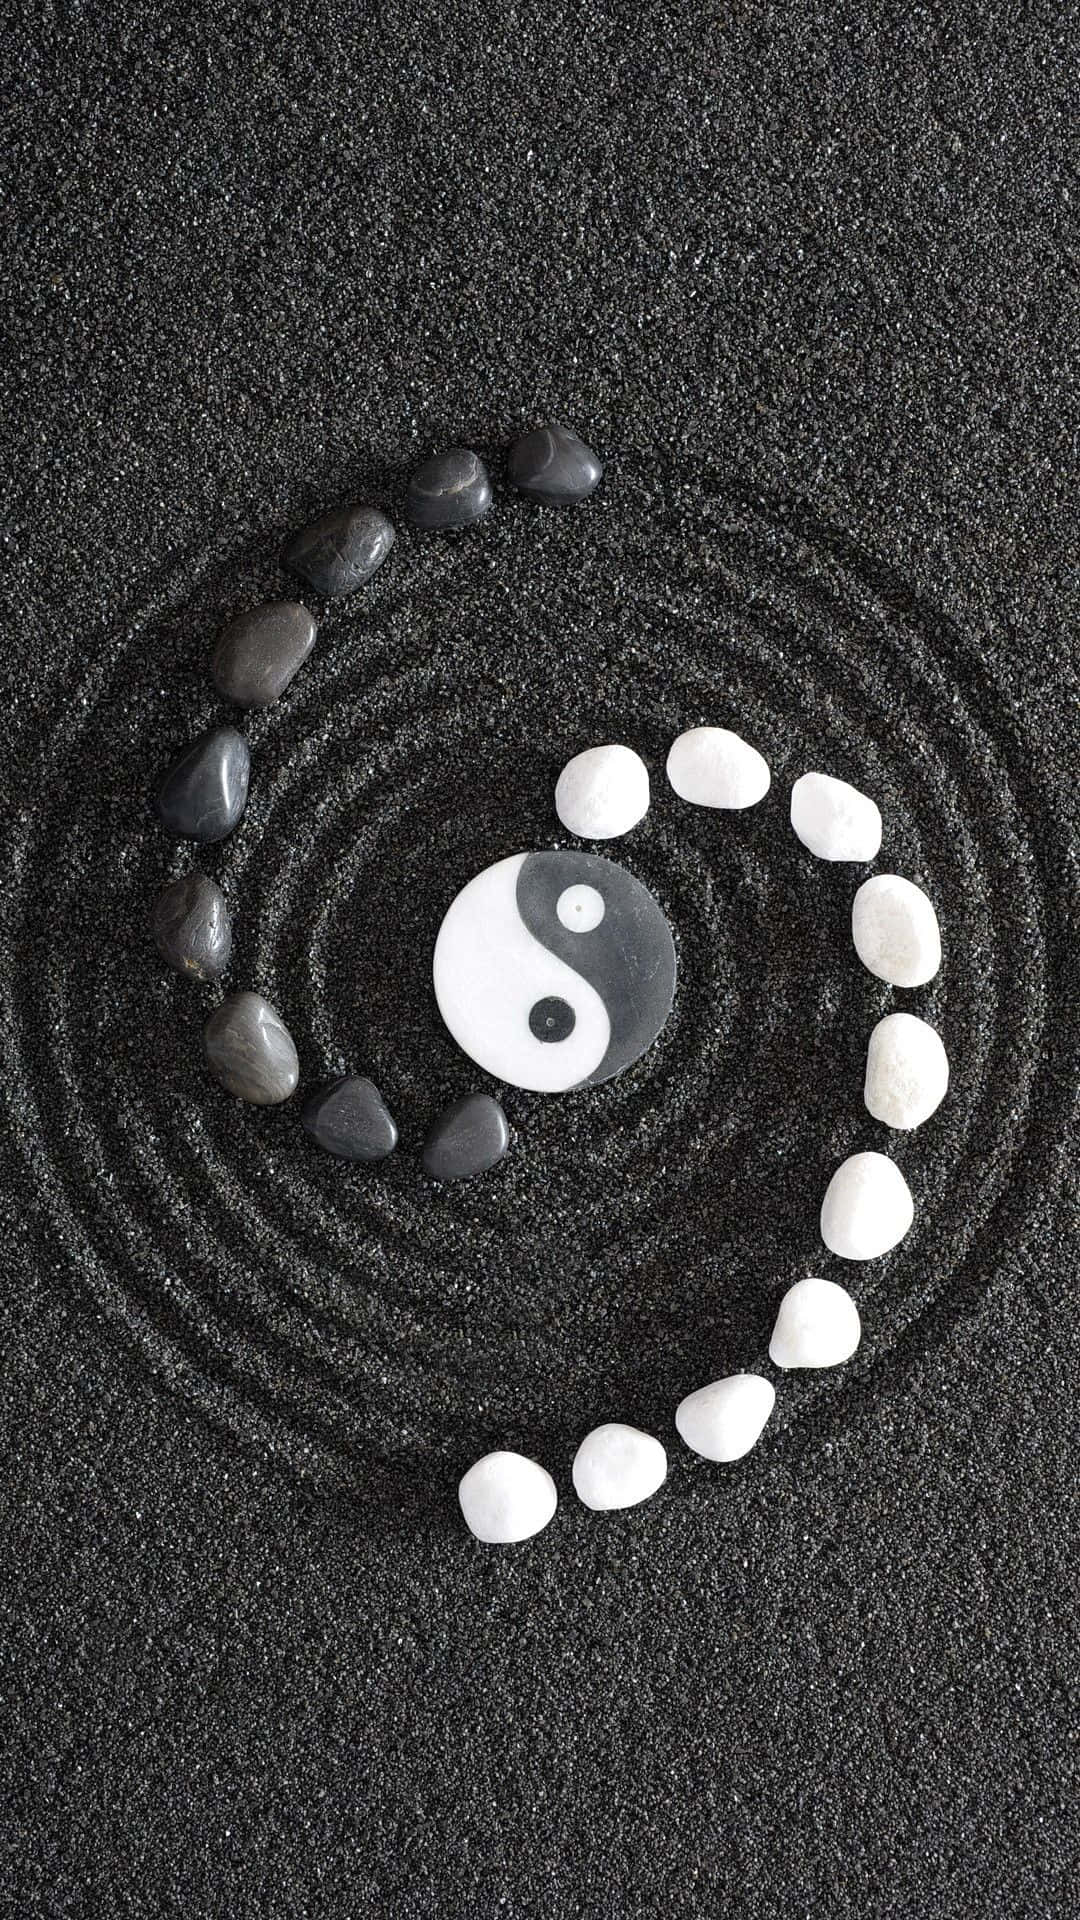 Yin and Yang - The Opposites of Life